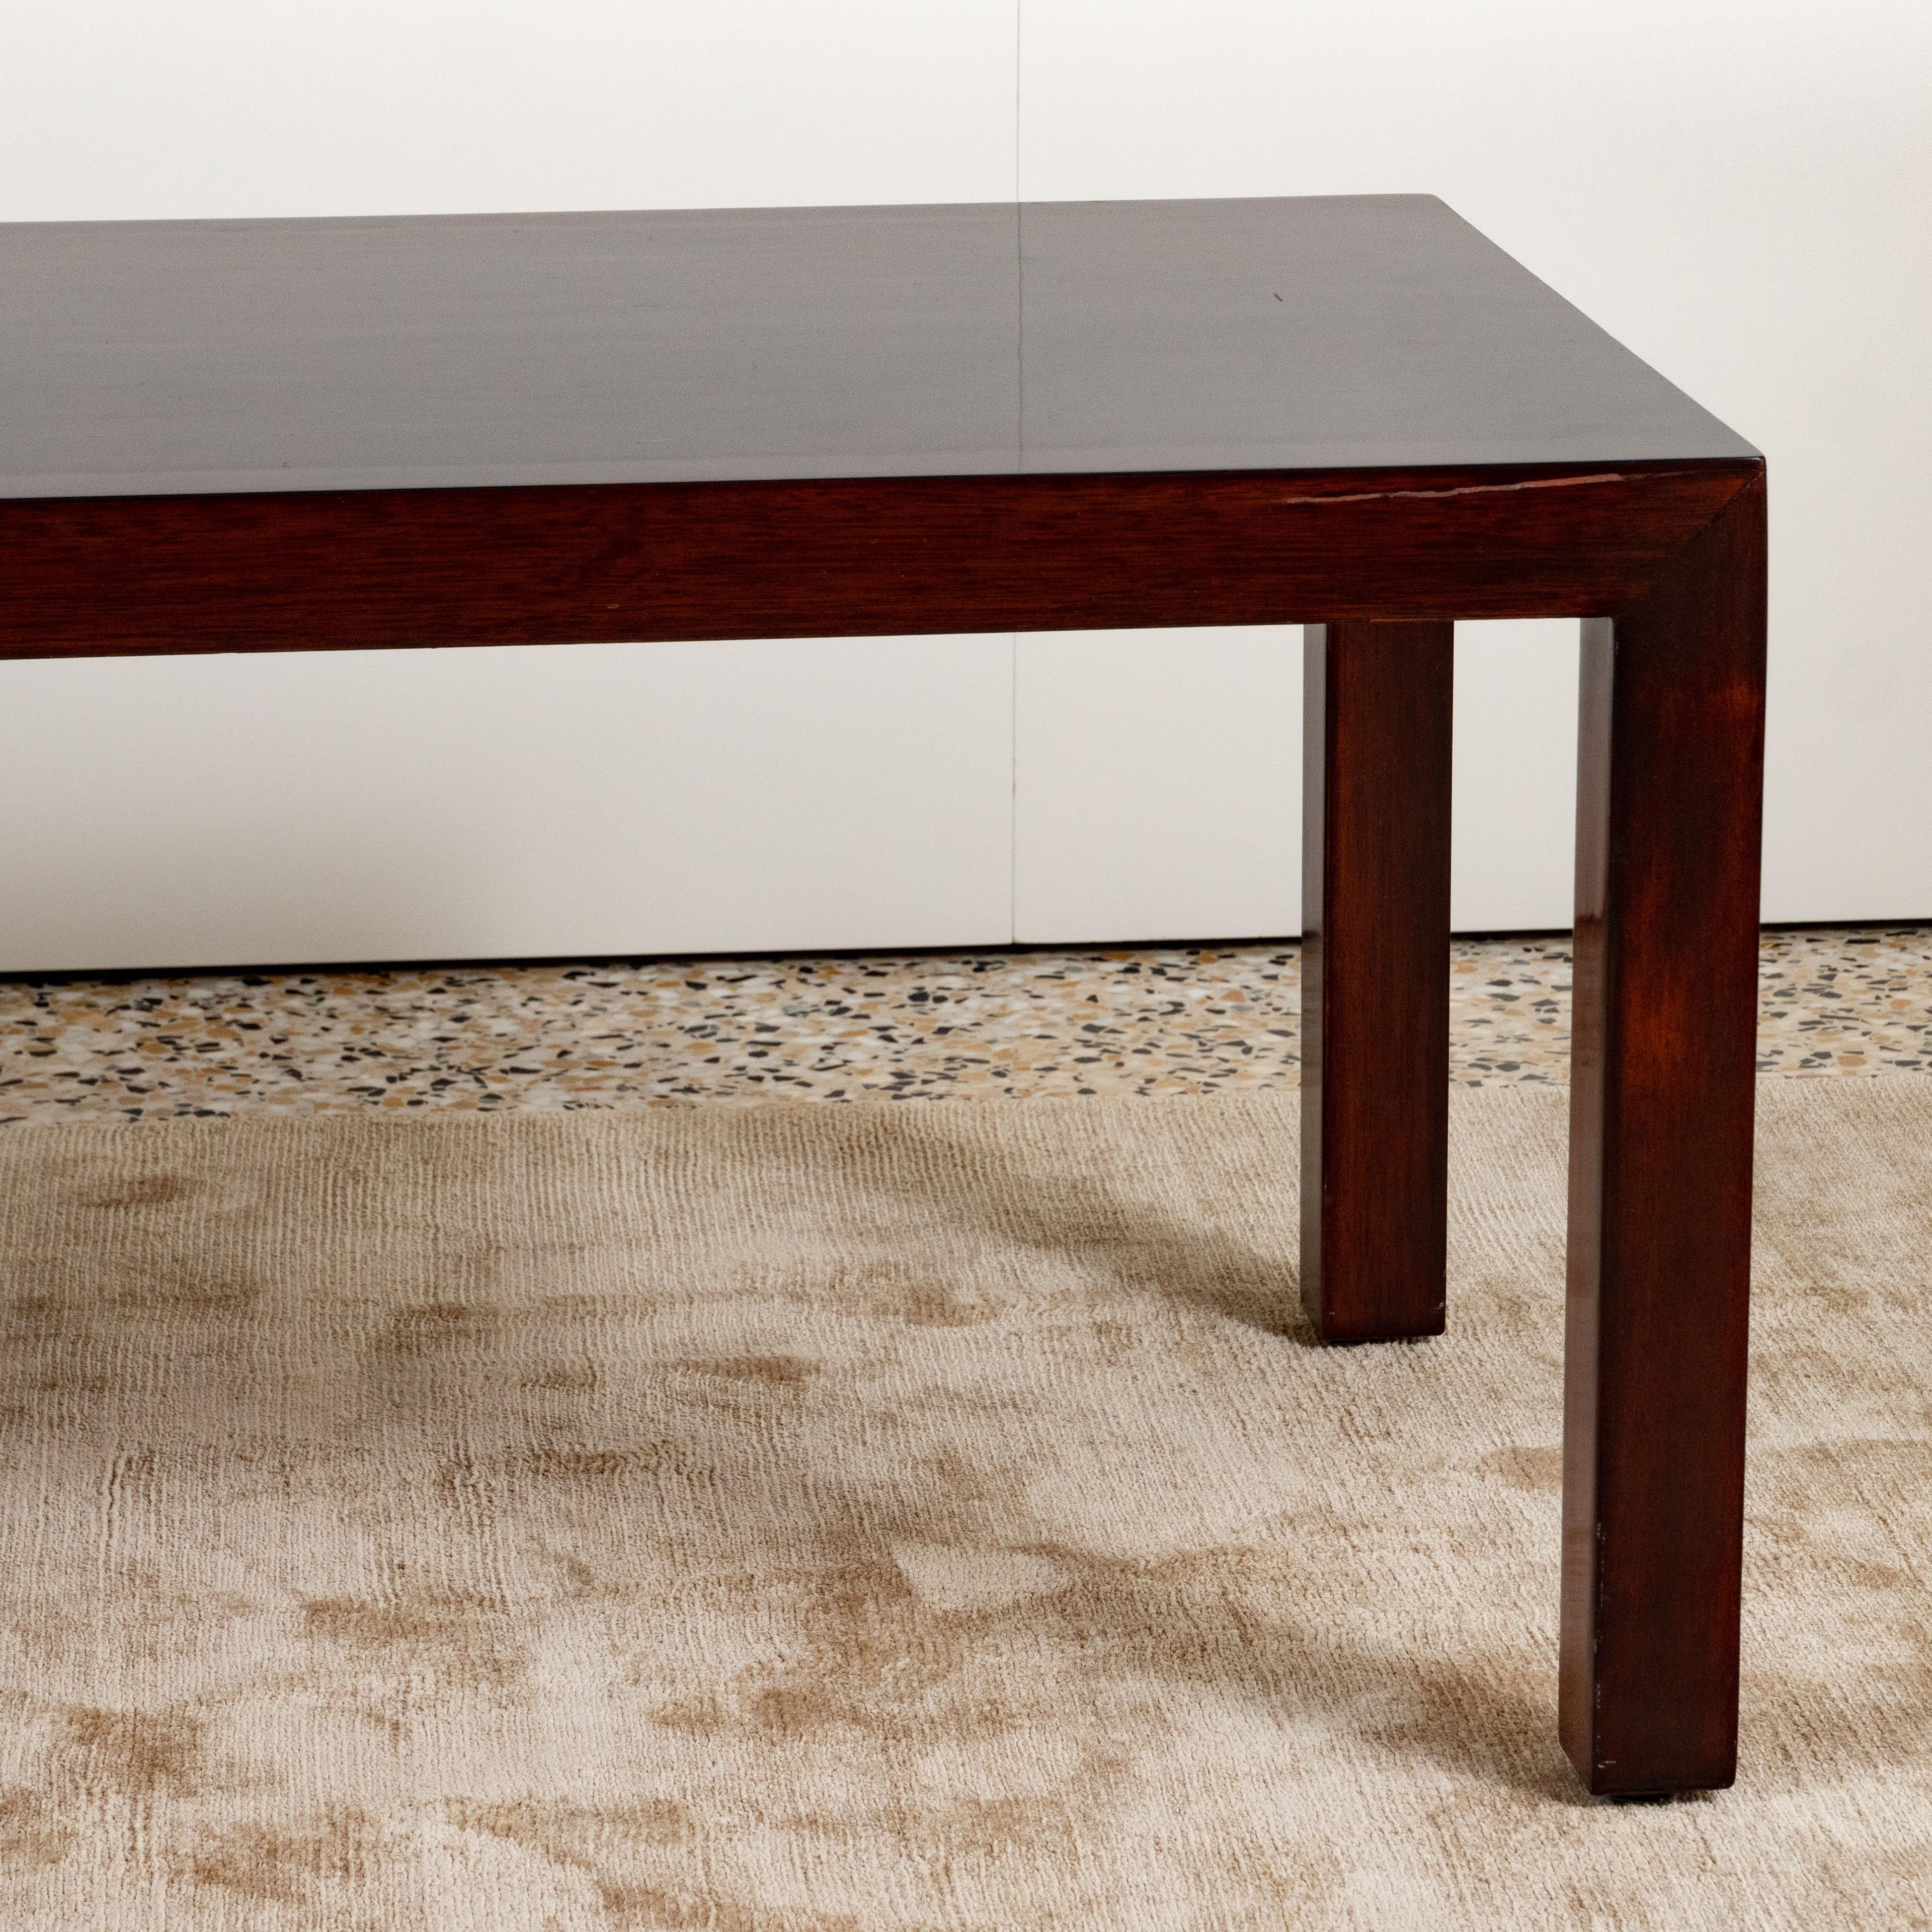 Mahogany coffee table in a Parsons style with rectangular top and square legs by Lane Furniture Company. USA, circa 1950.

Refinished in a dark stain.

Provenance: Originally acquired from Alan Moss Gallery, NYC.

